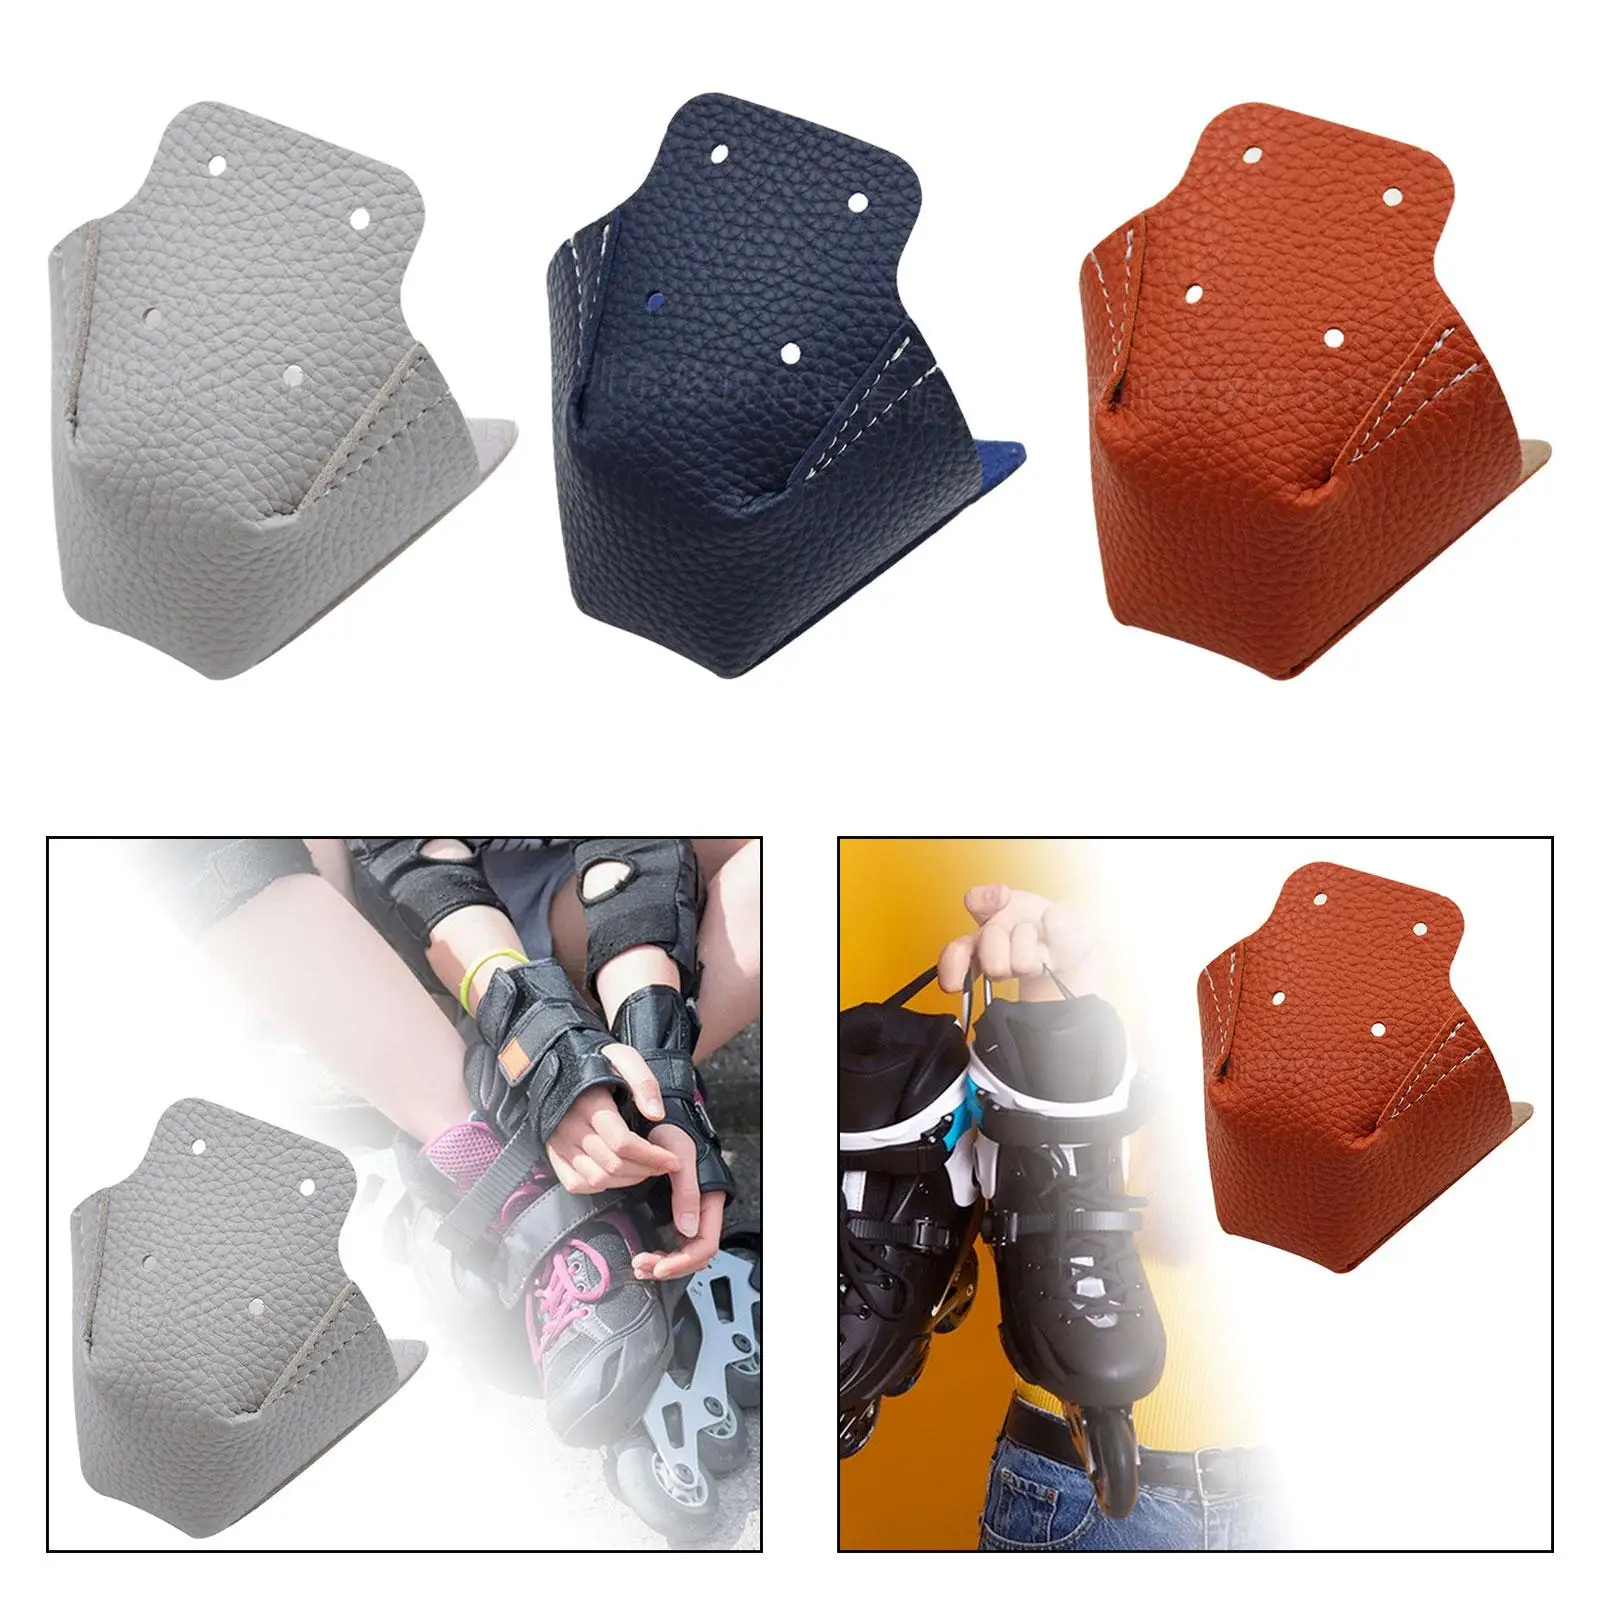 Roller Skate Toe Protector Durable PU Leather Portable Easy to Install Protective Cover for Roller Skate Outdoor Shoes Supplies